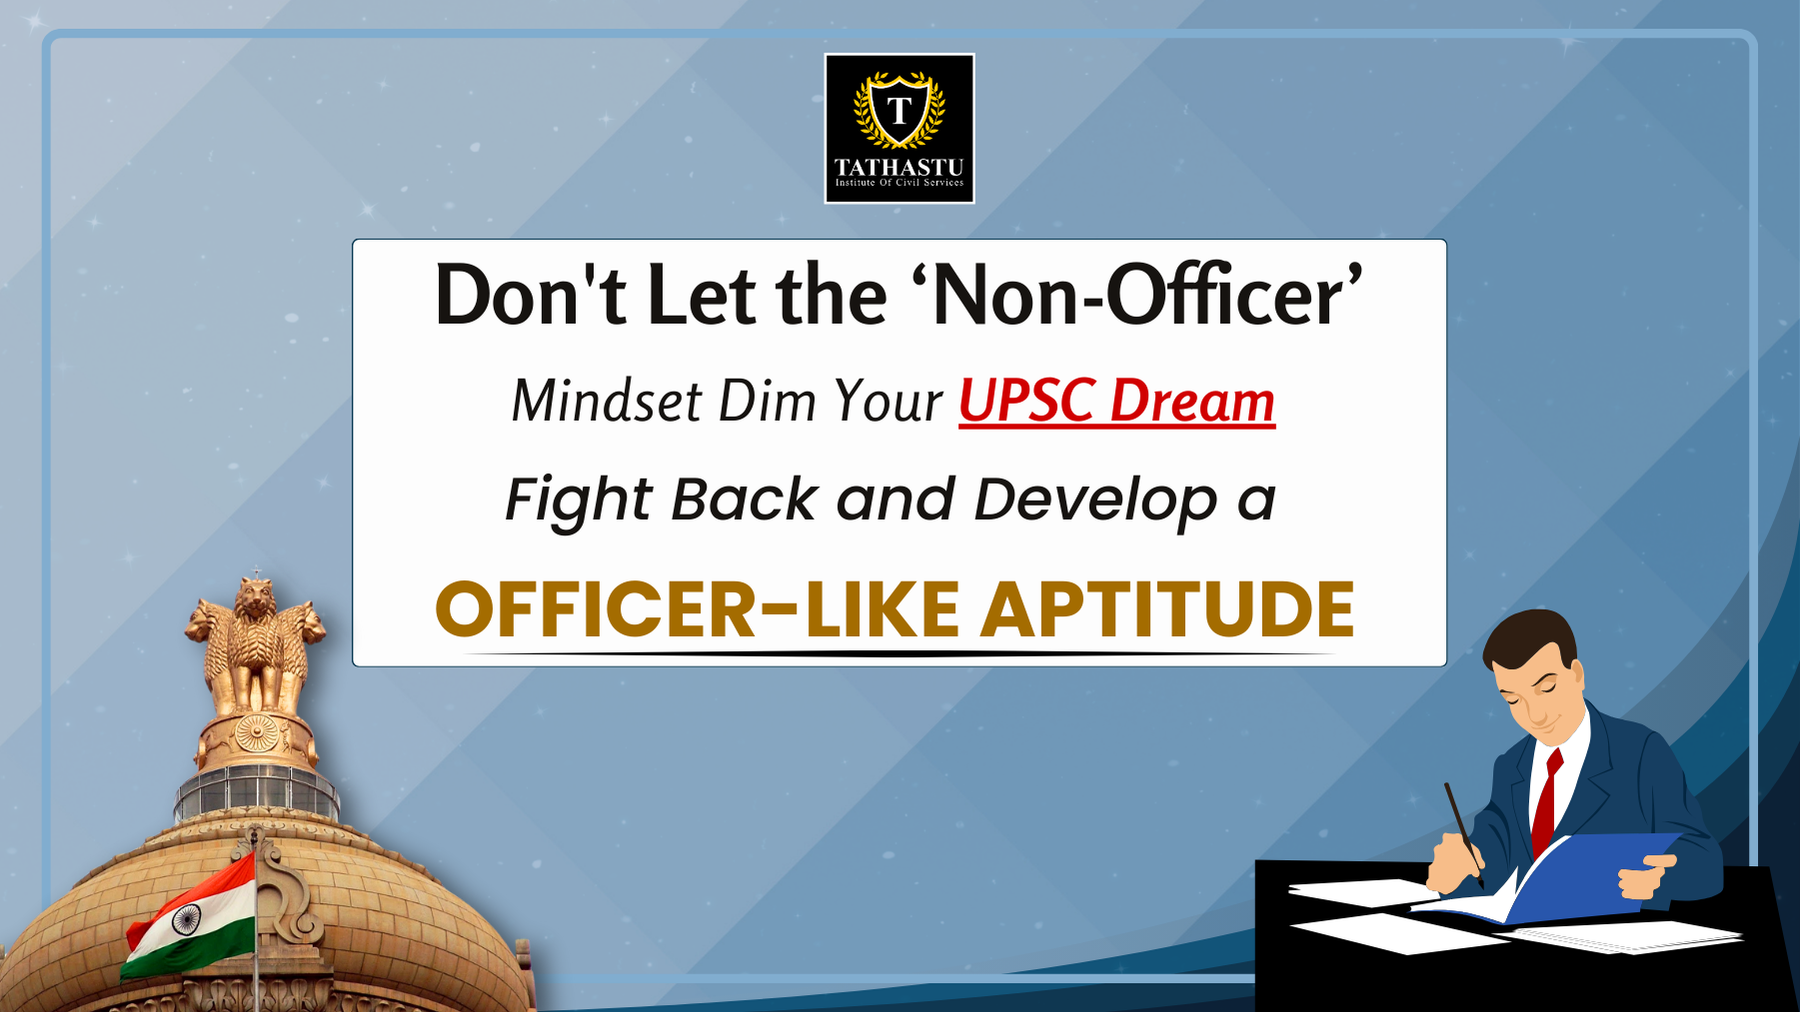 Don't Let the ‘Non-Officer’ Mindset Dim Your UPSC Dream: Fight Back and Develop a Officer-like Aptitude